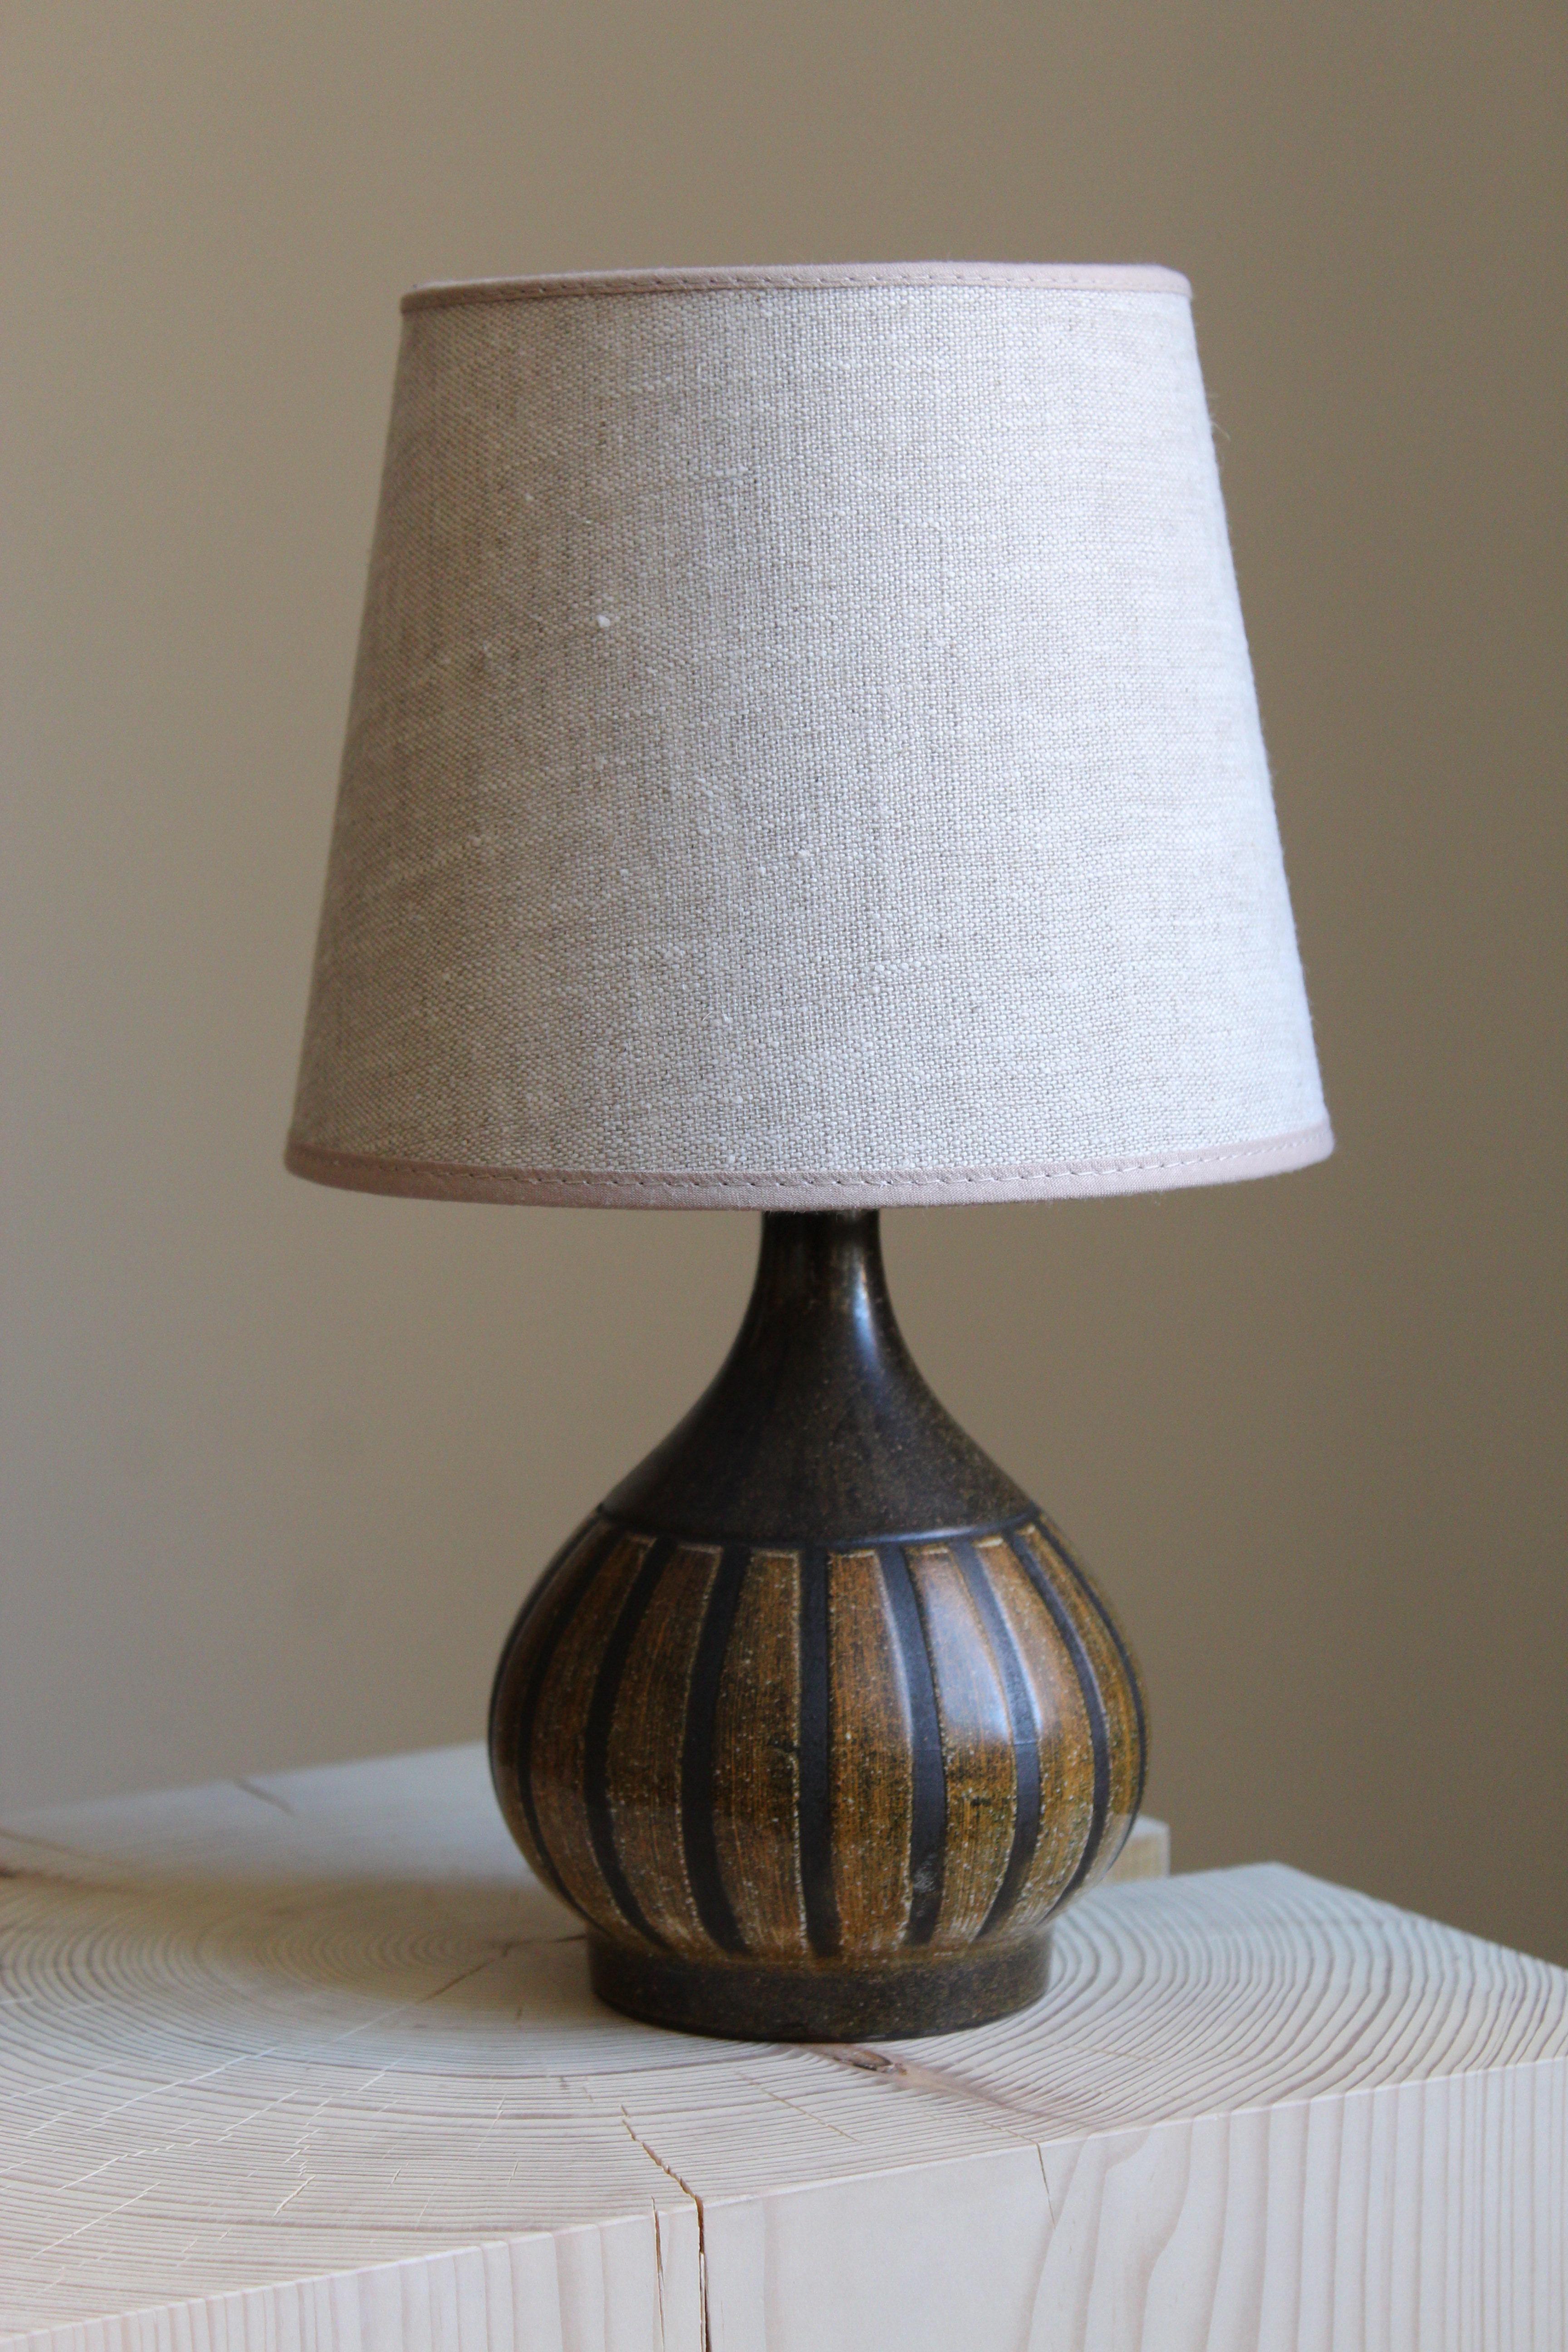 A small table lamp. Signed. Designed and produced in Denmark, 1960s. Unidentified designer and maker. Sold without lampshade.

Glaze features brown-black colors.